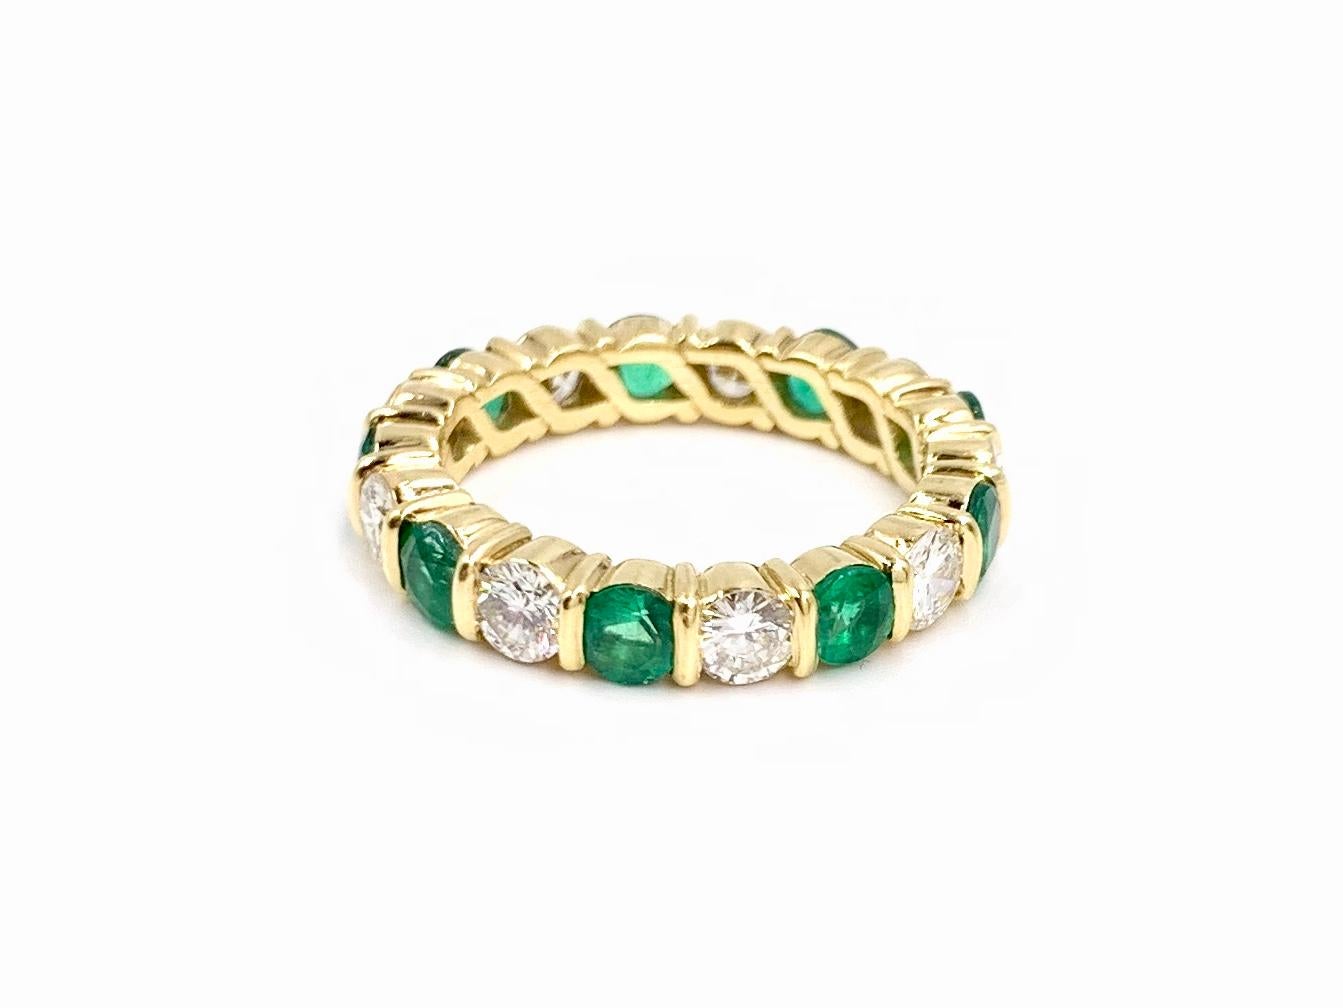 Round brilliant diamonds and green emeralds are beautifully bar set in 18 karat yellow gold in a classic alternating designed band ring. 9 high quality diamonds have a total weight of 1.54 carats at approximately F-G color, VS2 clarity. 9 vivid